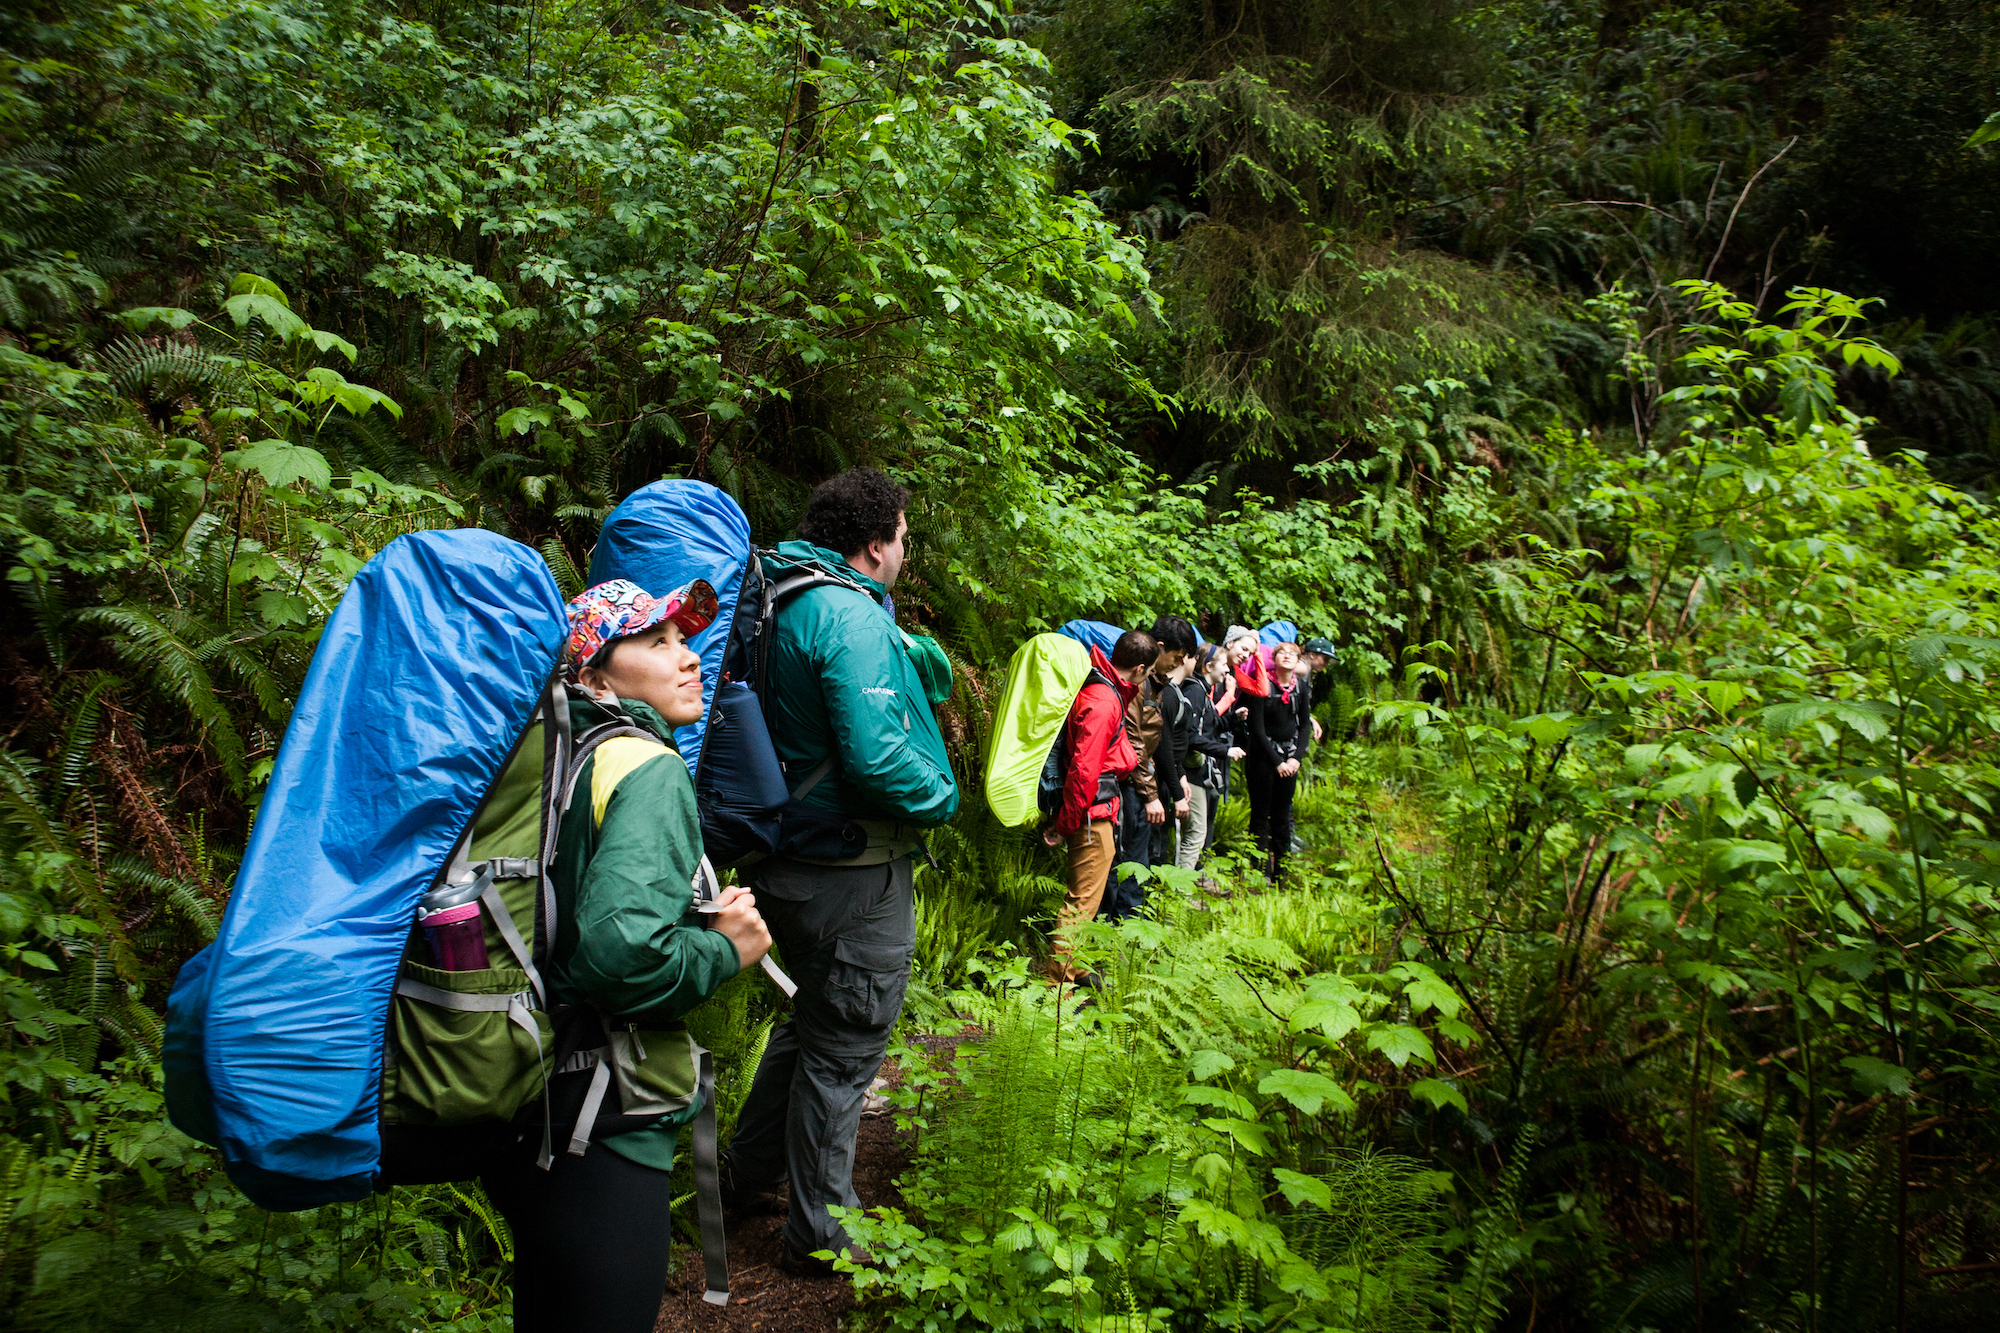 Group of people backpacking in the forest